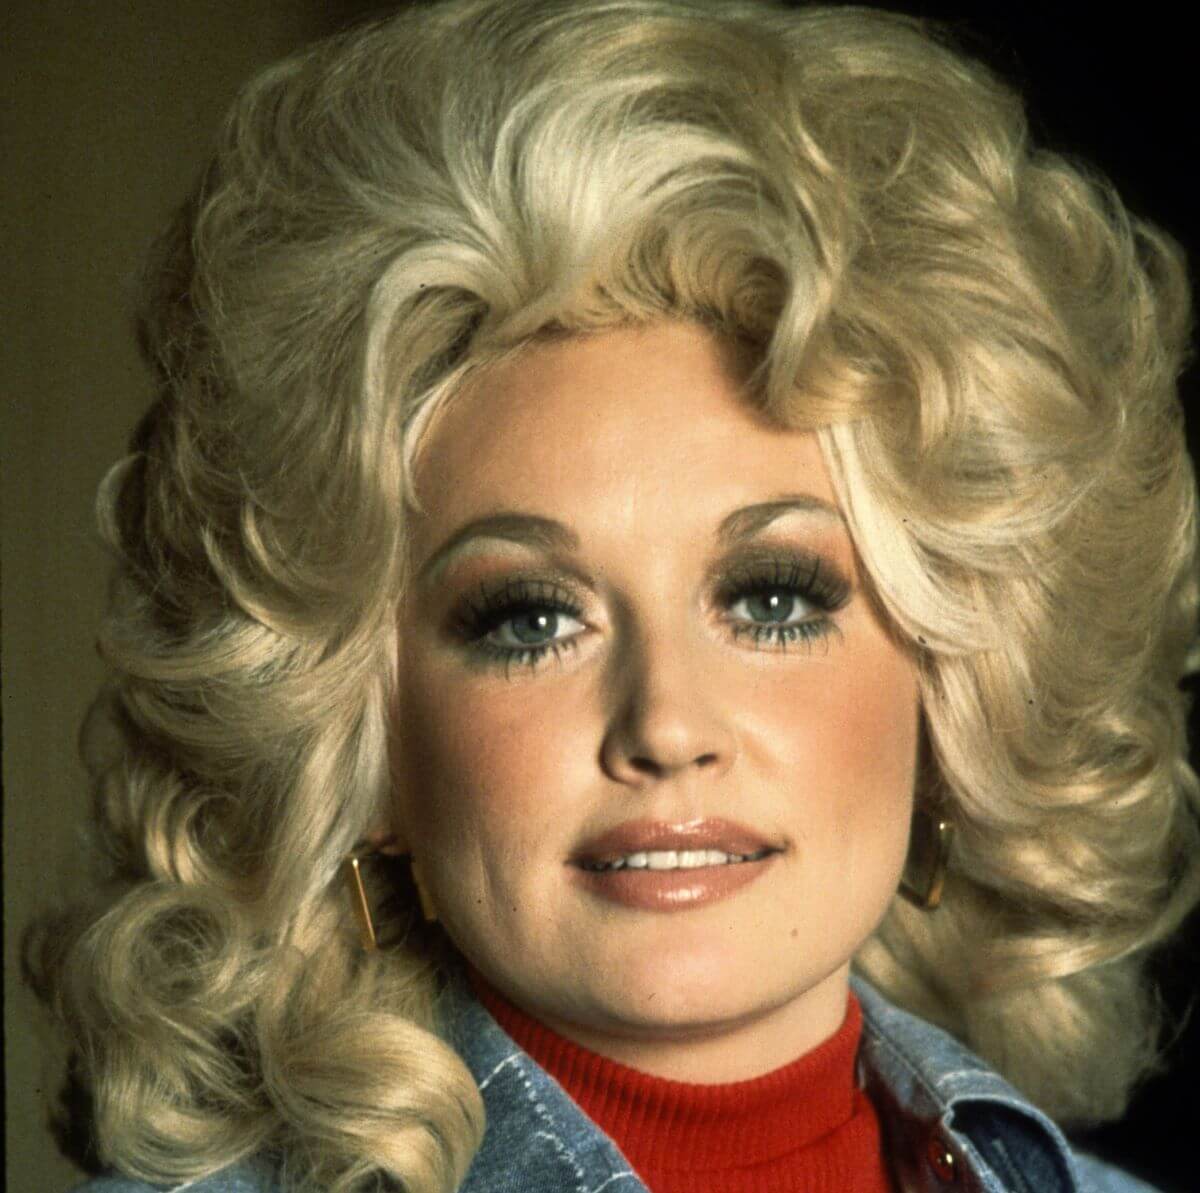 Dolly Parton wears a red shirt and denim jacket.